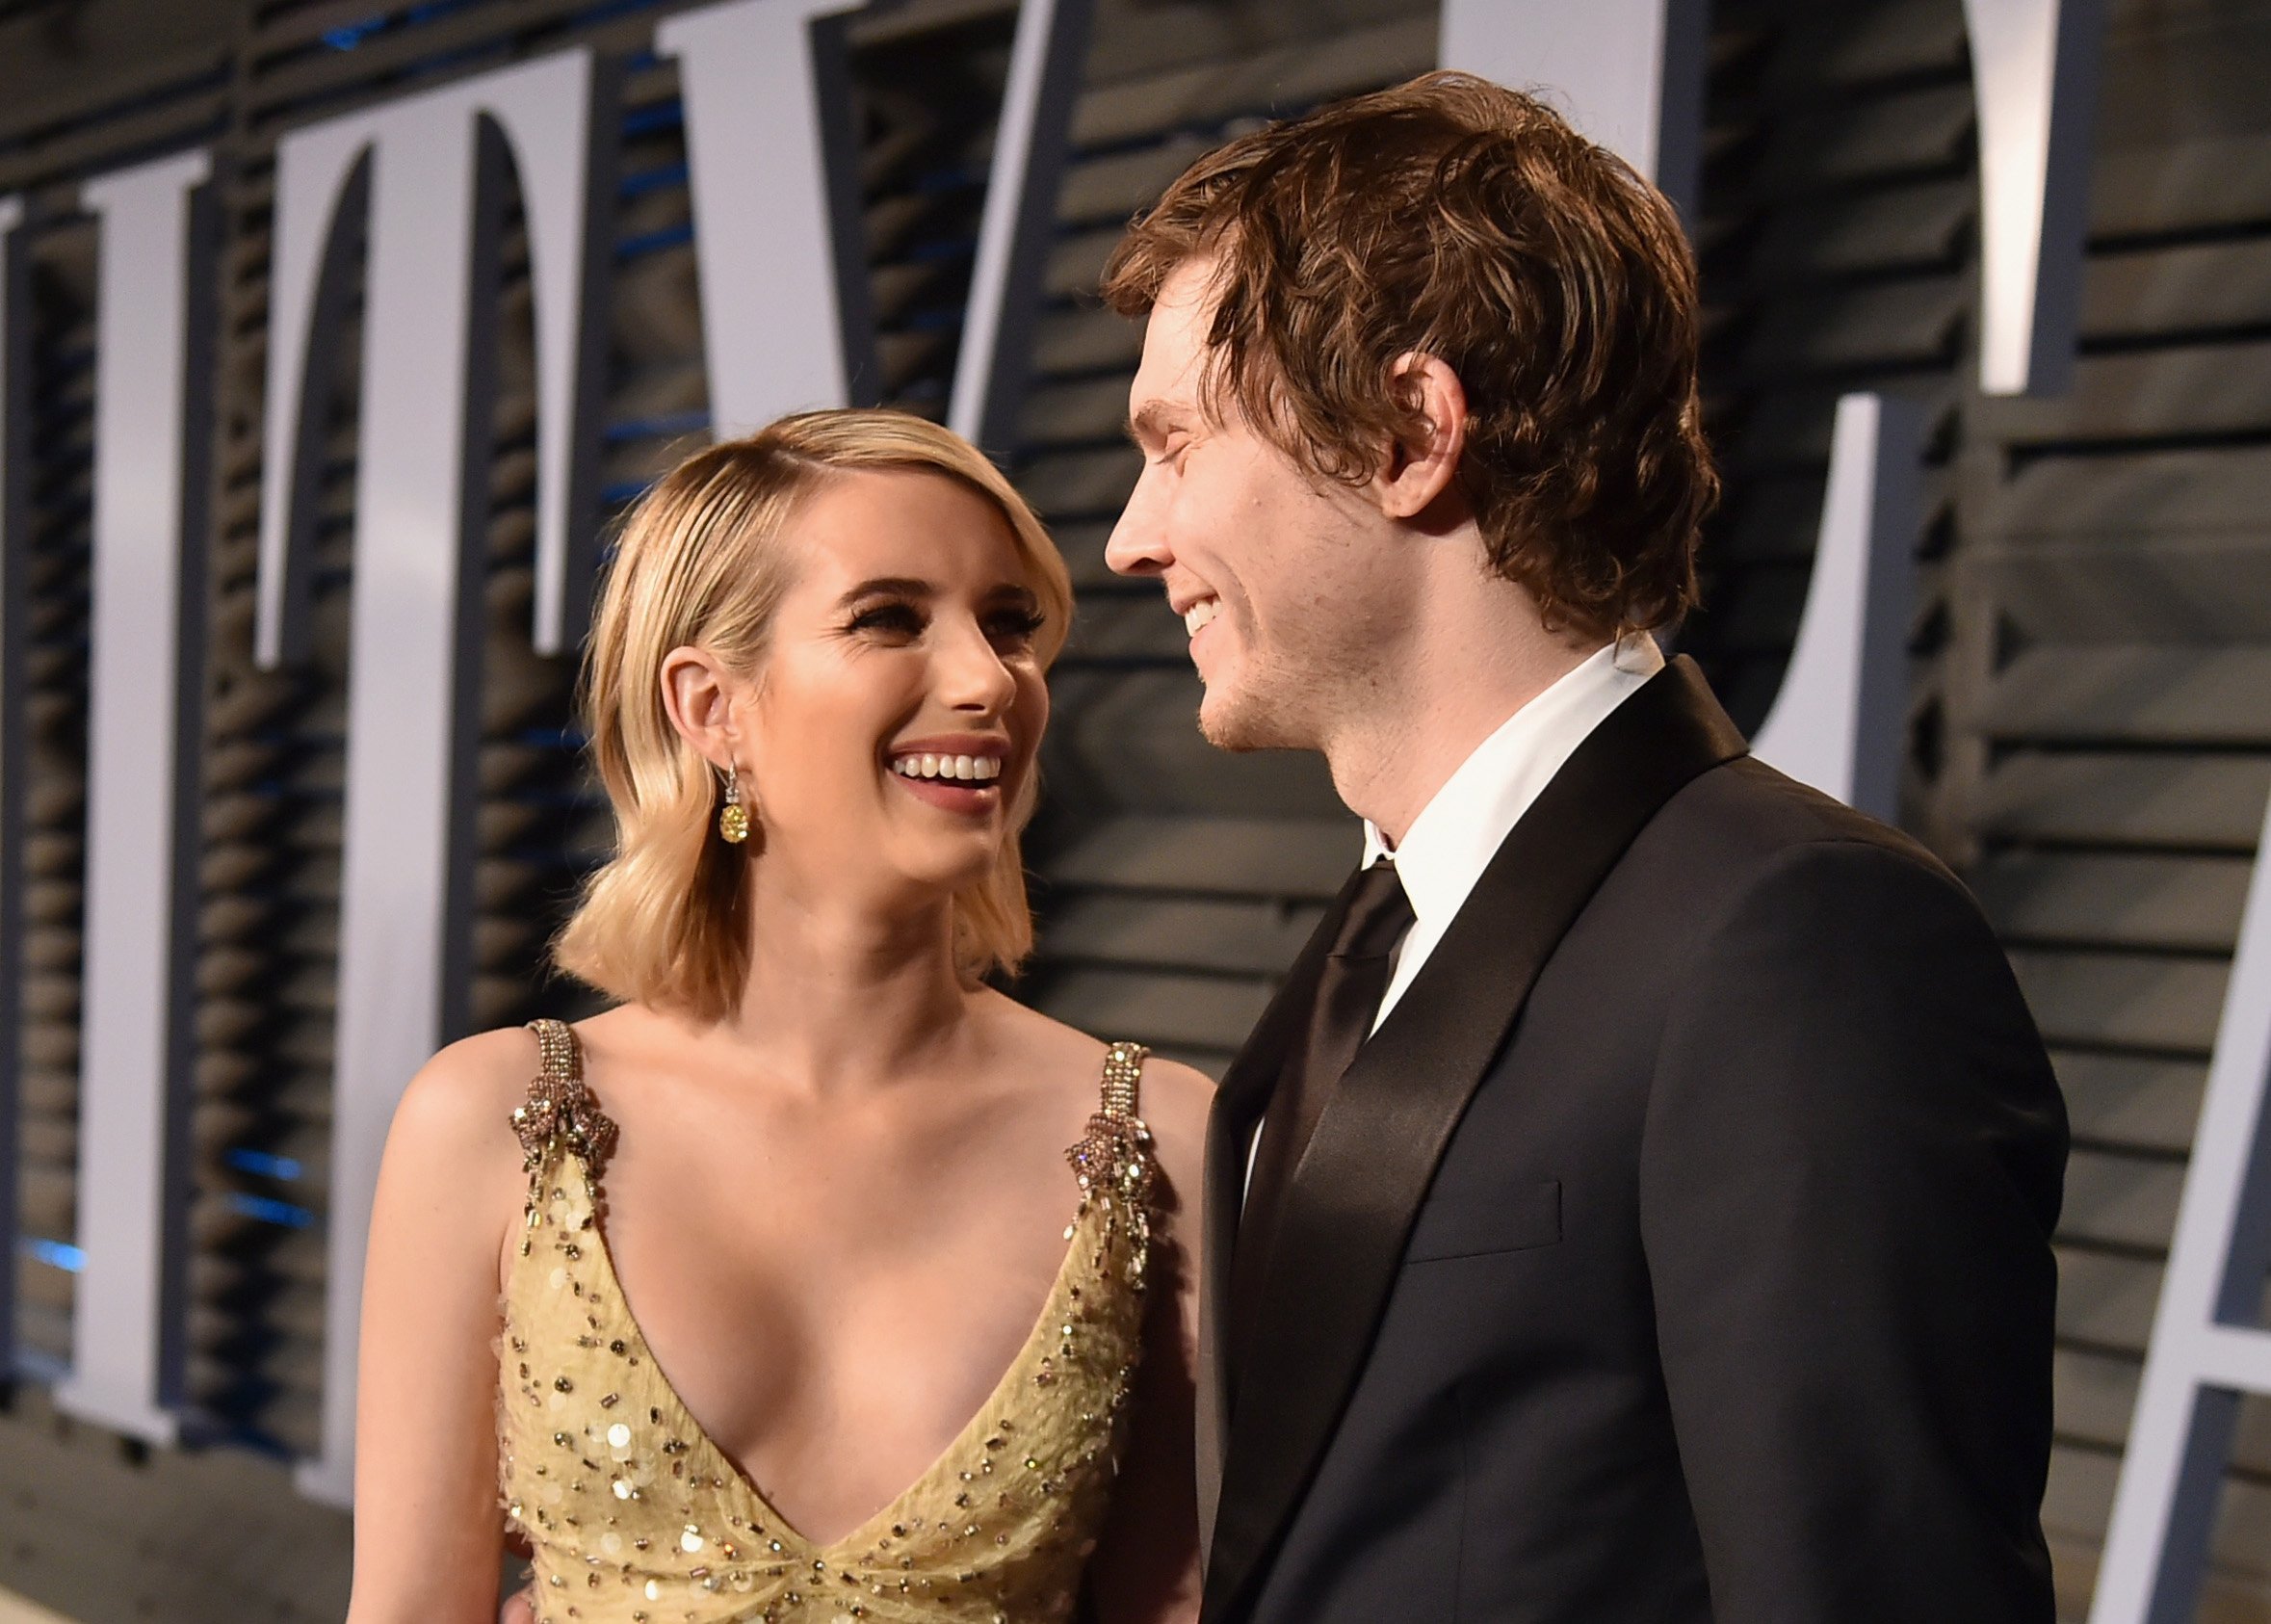 Emma Roberts and Evan Peters attend the 2018 Vanity Fair Oscar Party hosted by Radhika Jones on March 4, 2018 in Beverly Hills, California. | Source: Getty Images